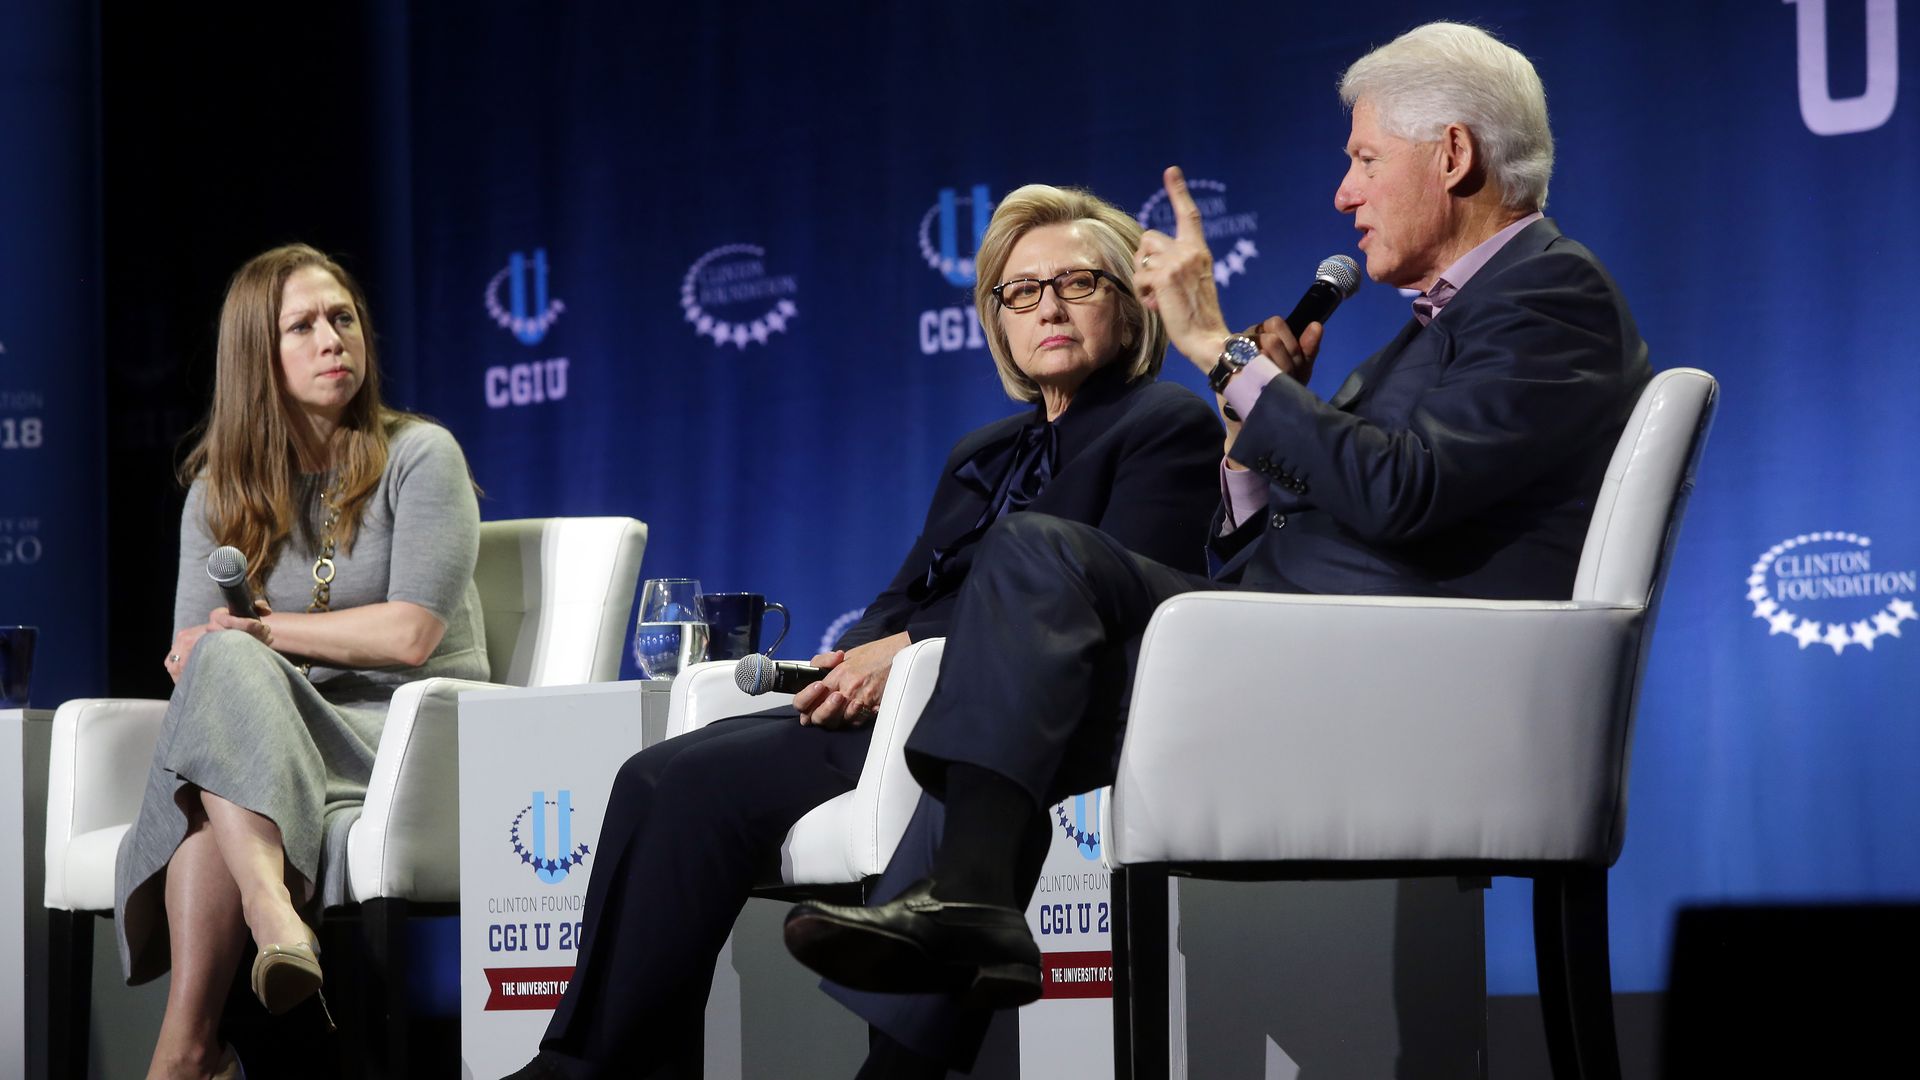 Chelsea, Hillary and Bill Clinton are seen at the 2018 Clinton Global Initiative conference.